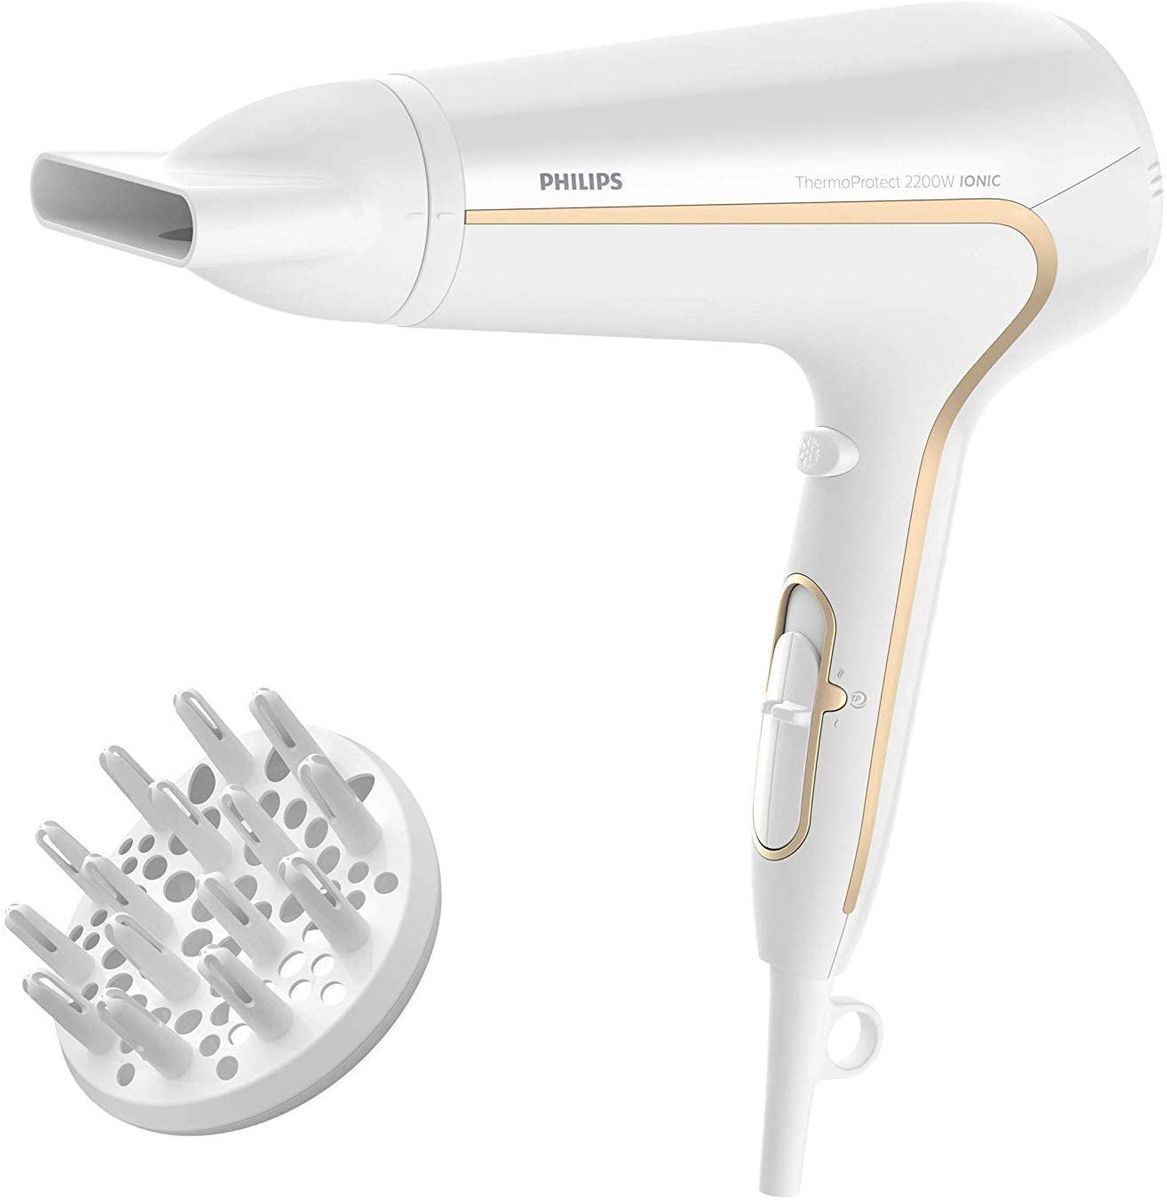 Philips DryCare Advanced hair dryer with ThermoProtect technology HP8232/00, 2200 W hair dryer, ionization function, 6 fan and temperature settings, incl. diffuser & styling nozzle, hair dryer White